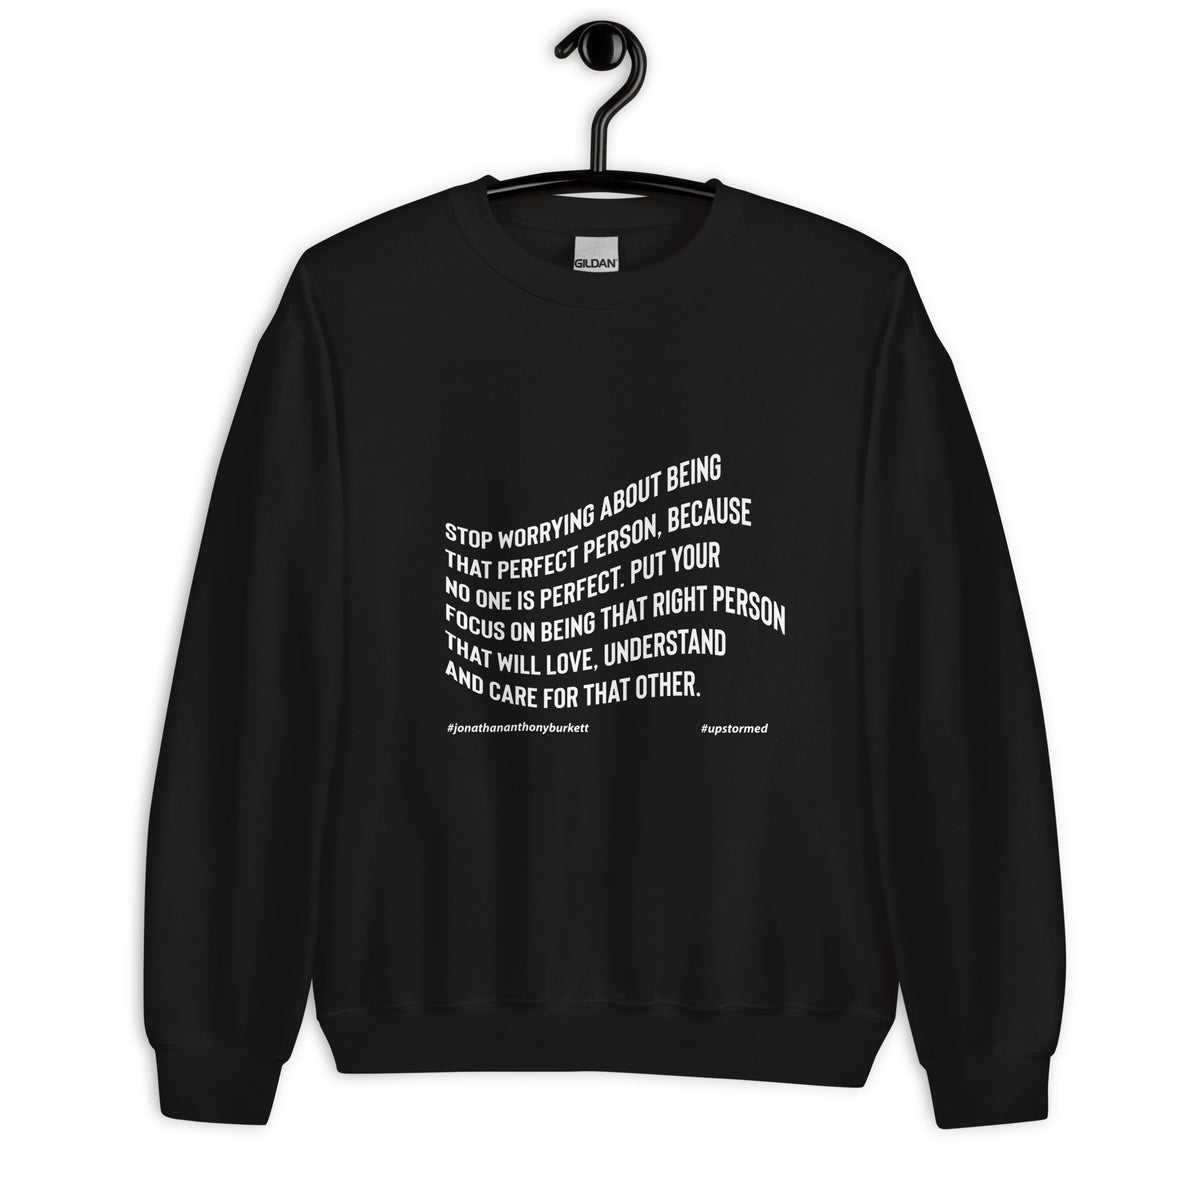 Stop Worrying About Being That Perfect Person Upstormed Sweatshirt